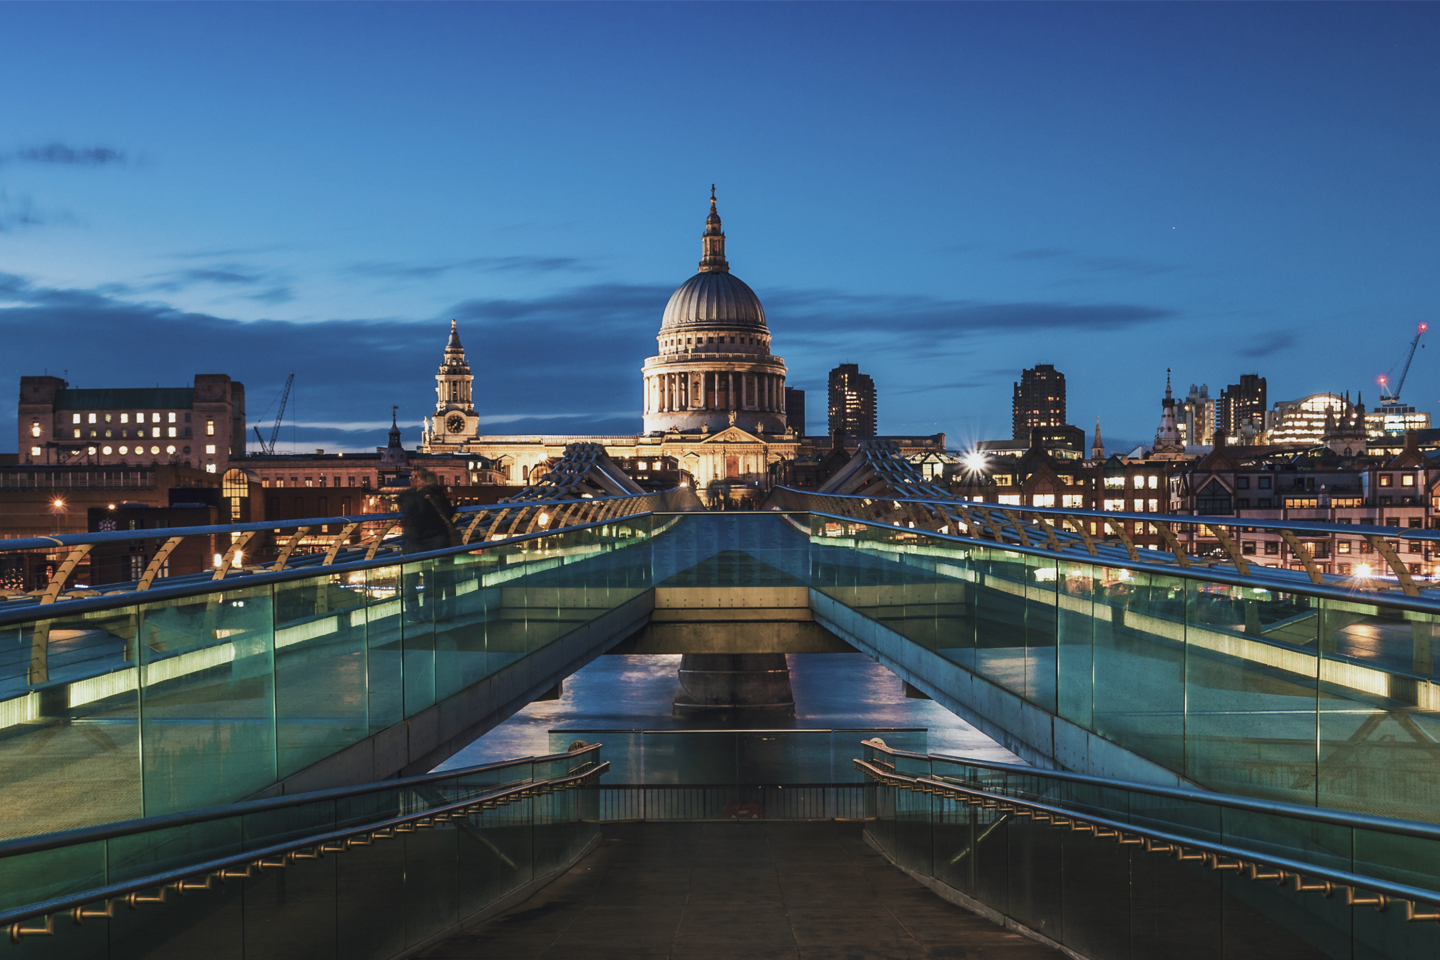 St Paul's Cathedral from the London Millennium Footbridge in the evening. Russell-Cooke